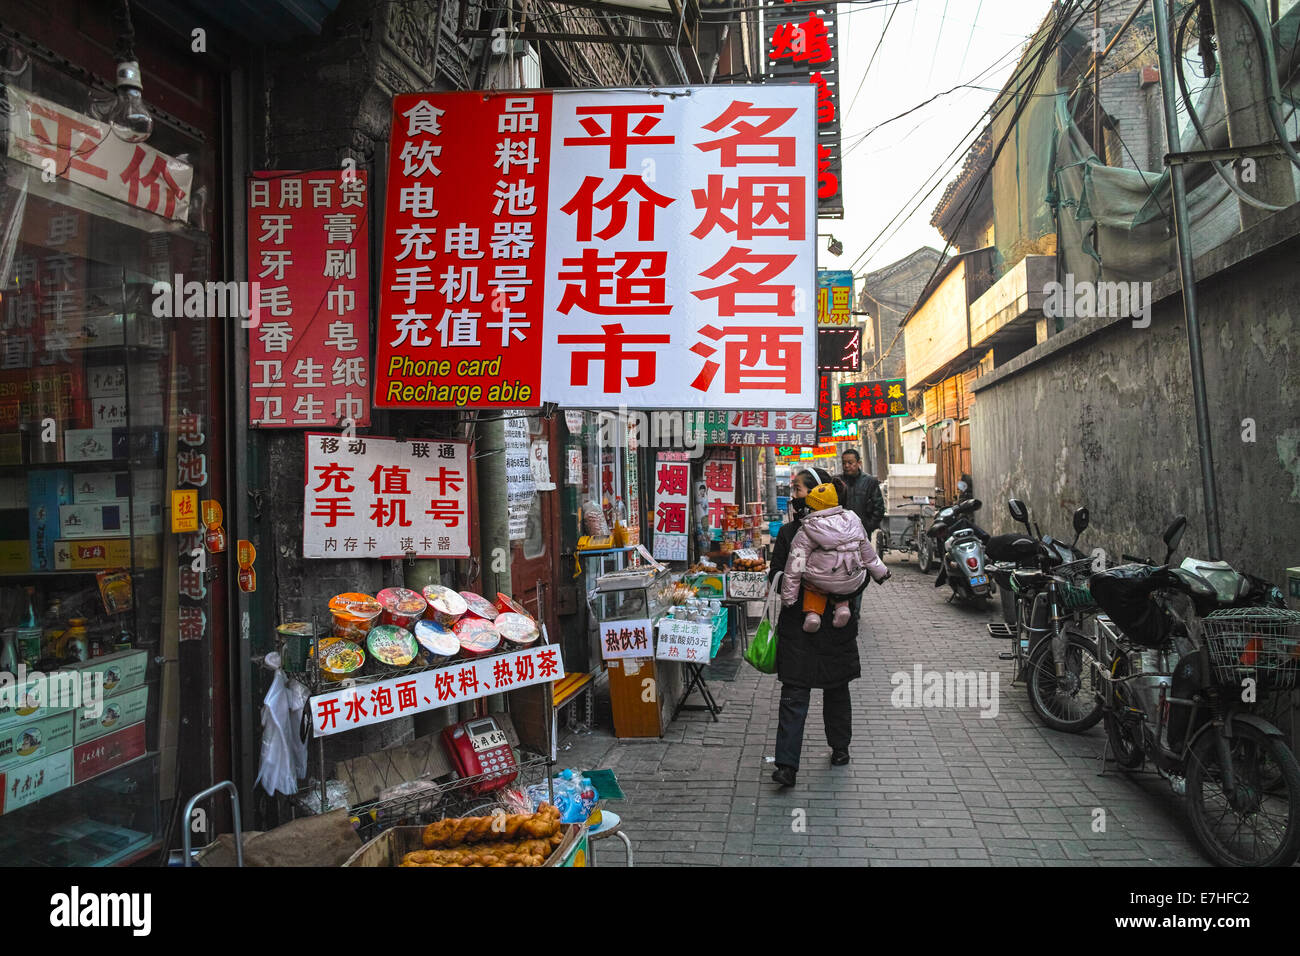 An old Beijng Hutong full with small shops and restaurants Stock Photo